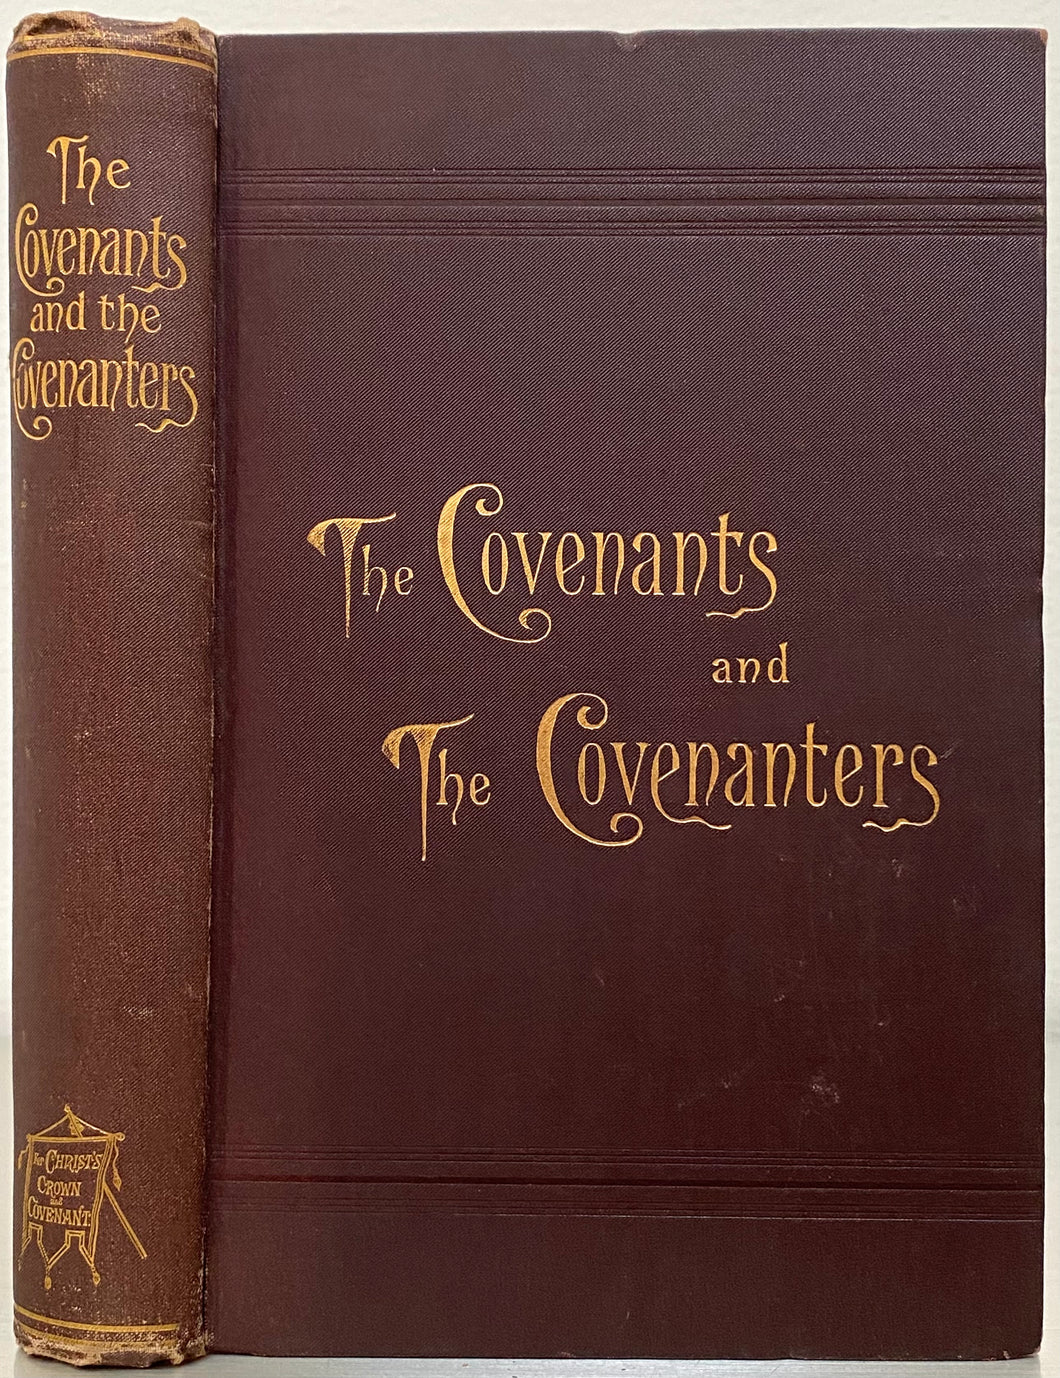 1895 JAMES KERR. The Covenants and the Covenanters. Important Primary Resources!